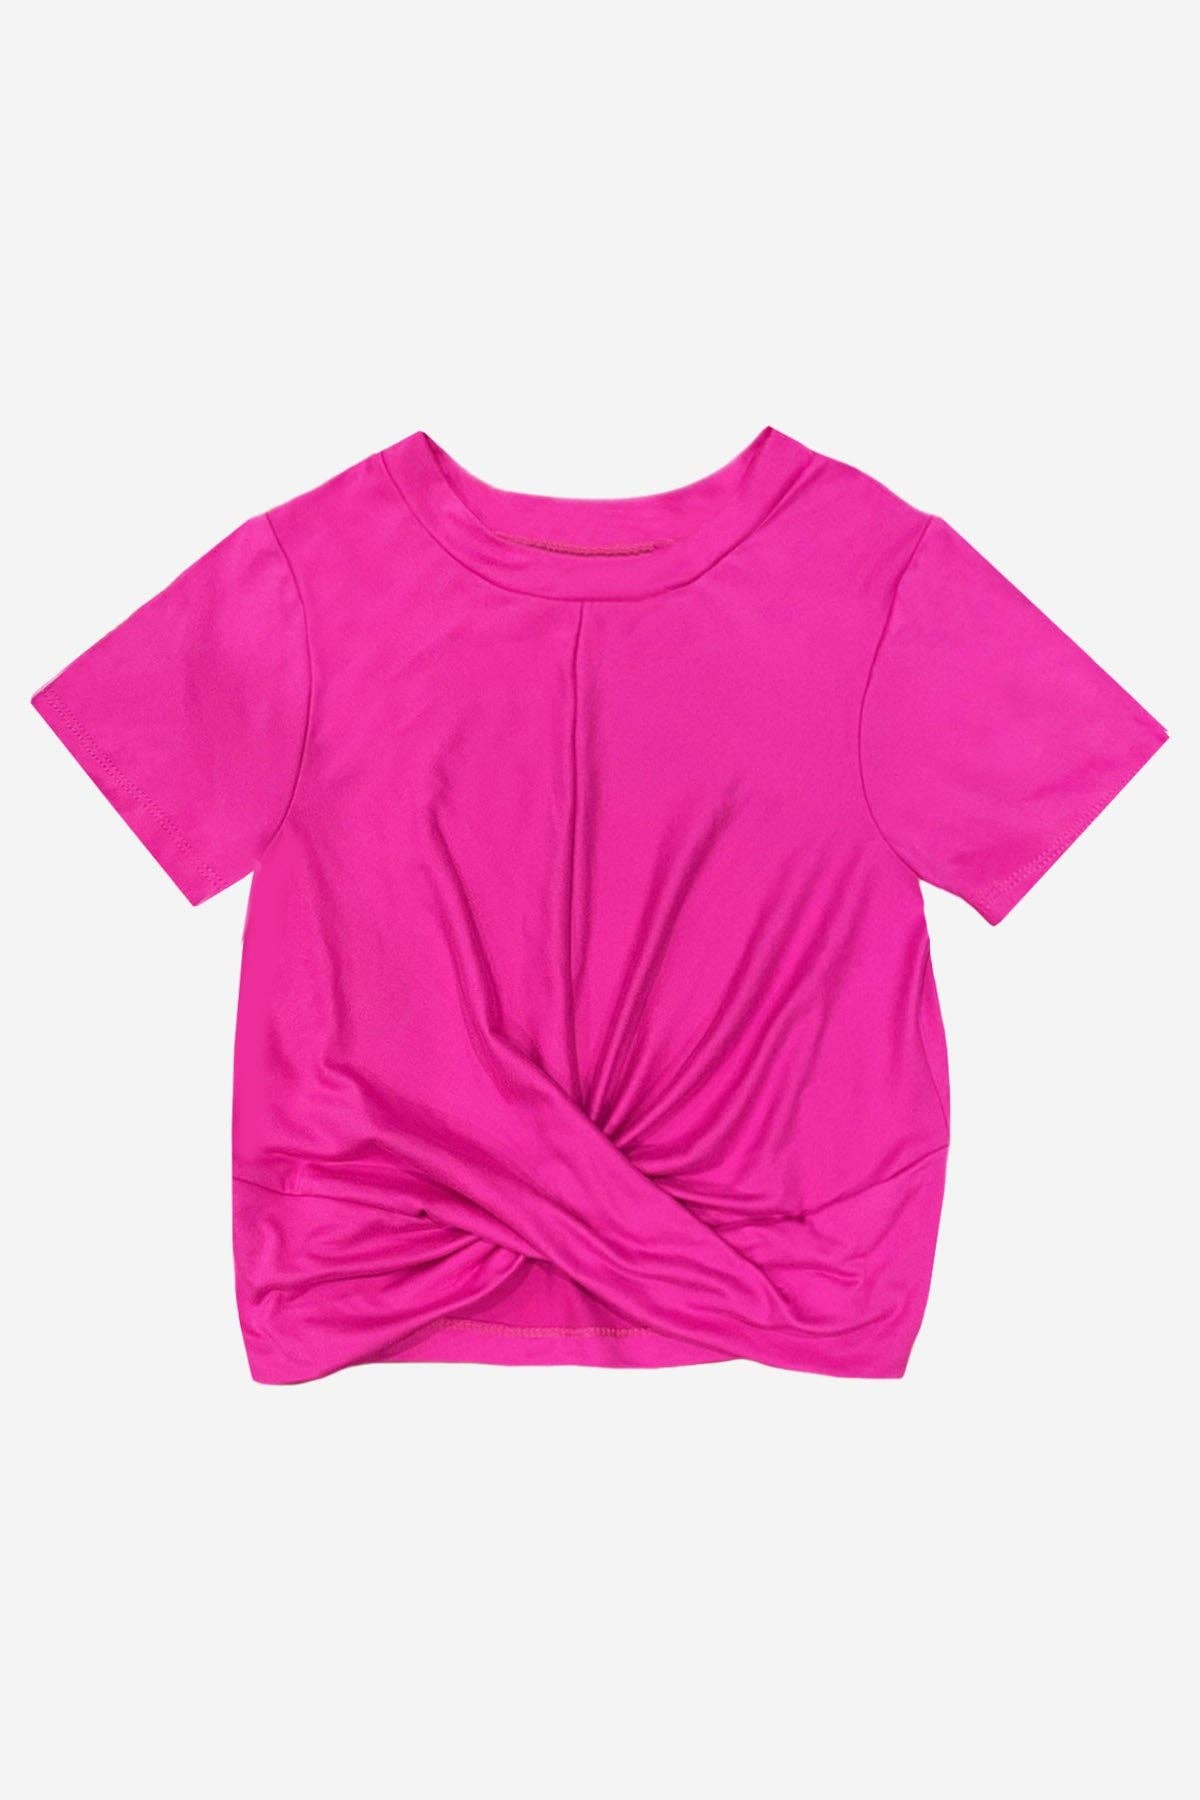 Simply Soft Short Sleeve Twist Front Top - Bright Fuchsia